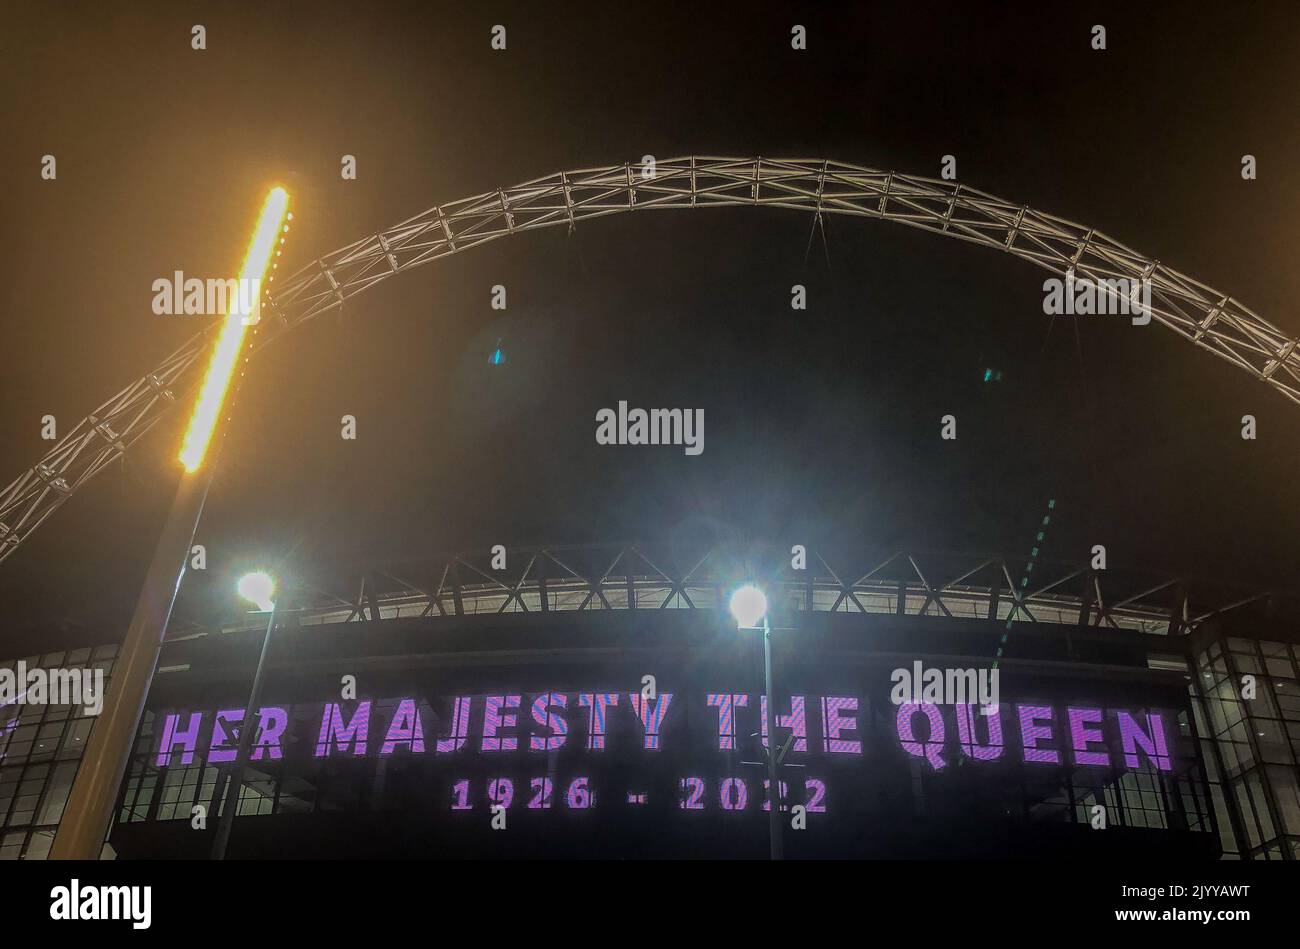 London, UK. 08th Sep, 2022. A tribute to Queen Elizabeth II is displayed on the screen at Wembley Stadium on September 8, 2022 following news of her death at the age 96 earlier in the day. Photo by Andrew Aleksiejczuk. Credit: PRiME Media Images/Alamy Live News Stock Photo